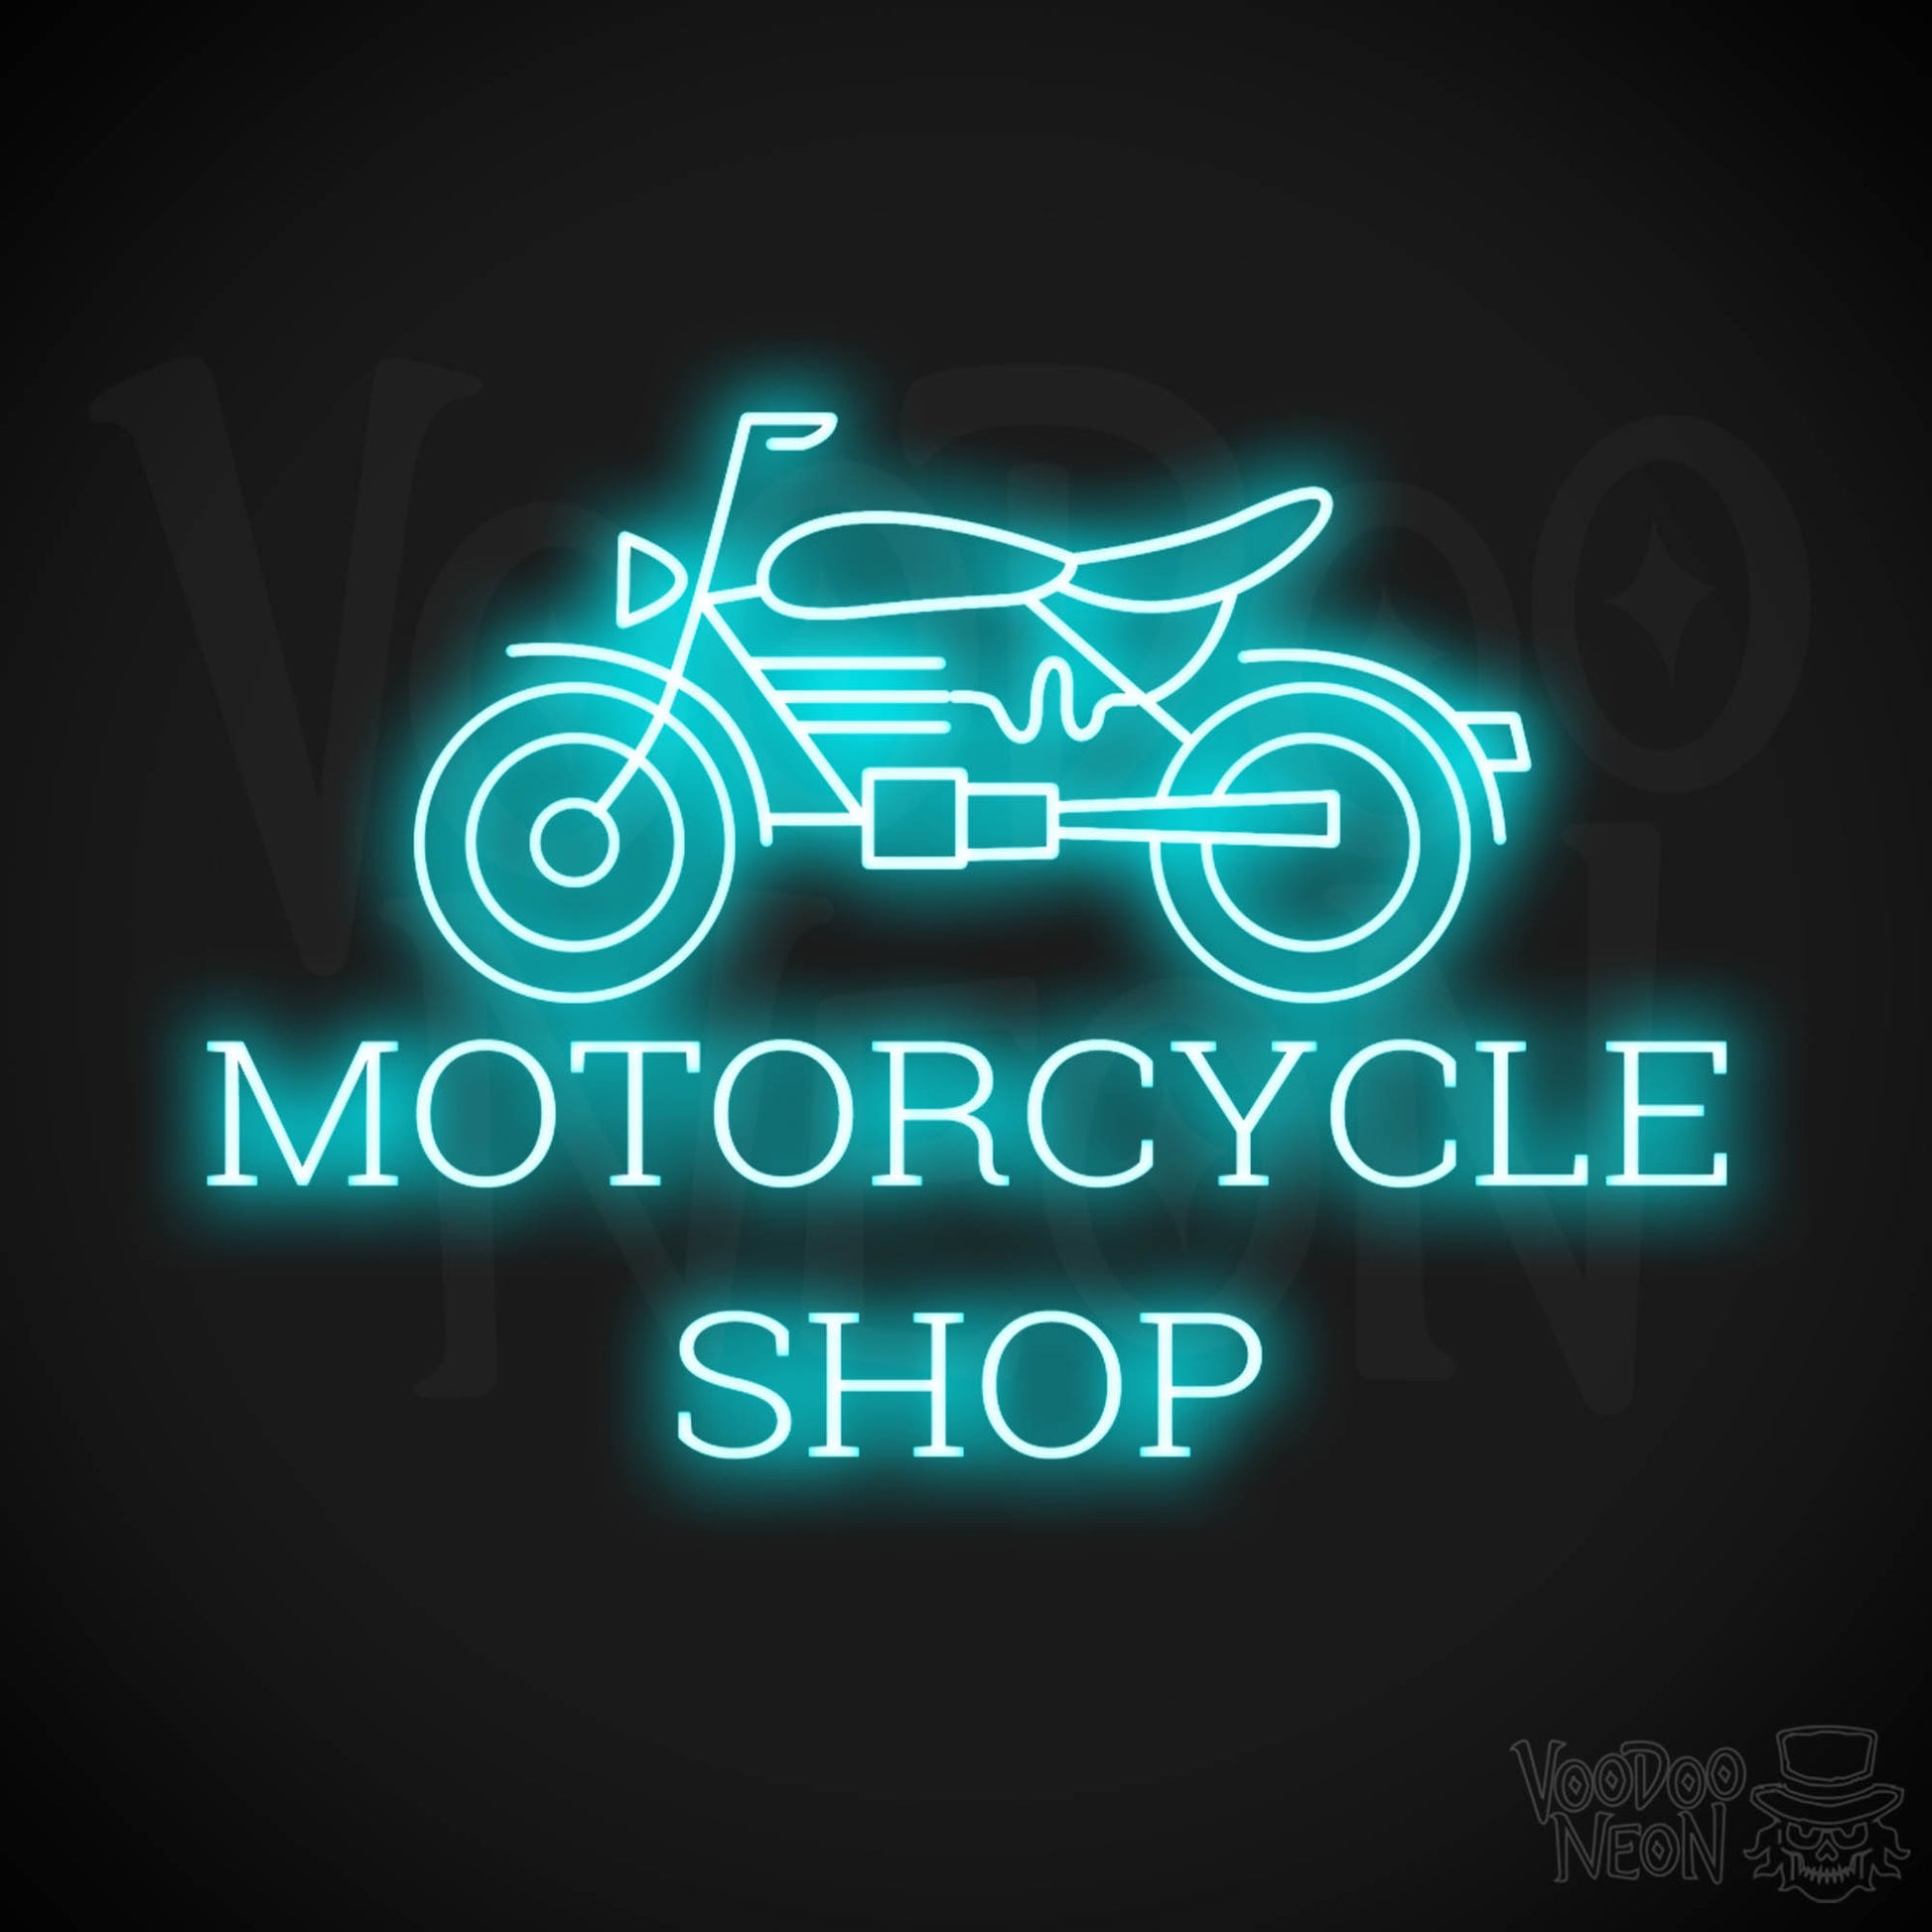 Motorcycle Shop LED Neon - Ice Blue